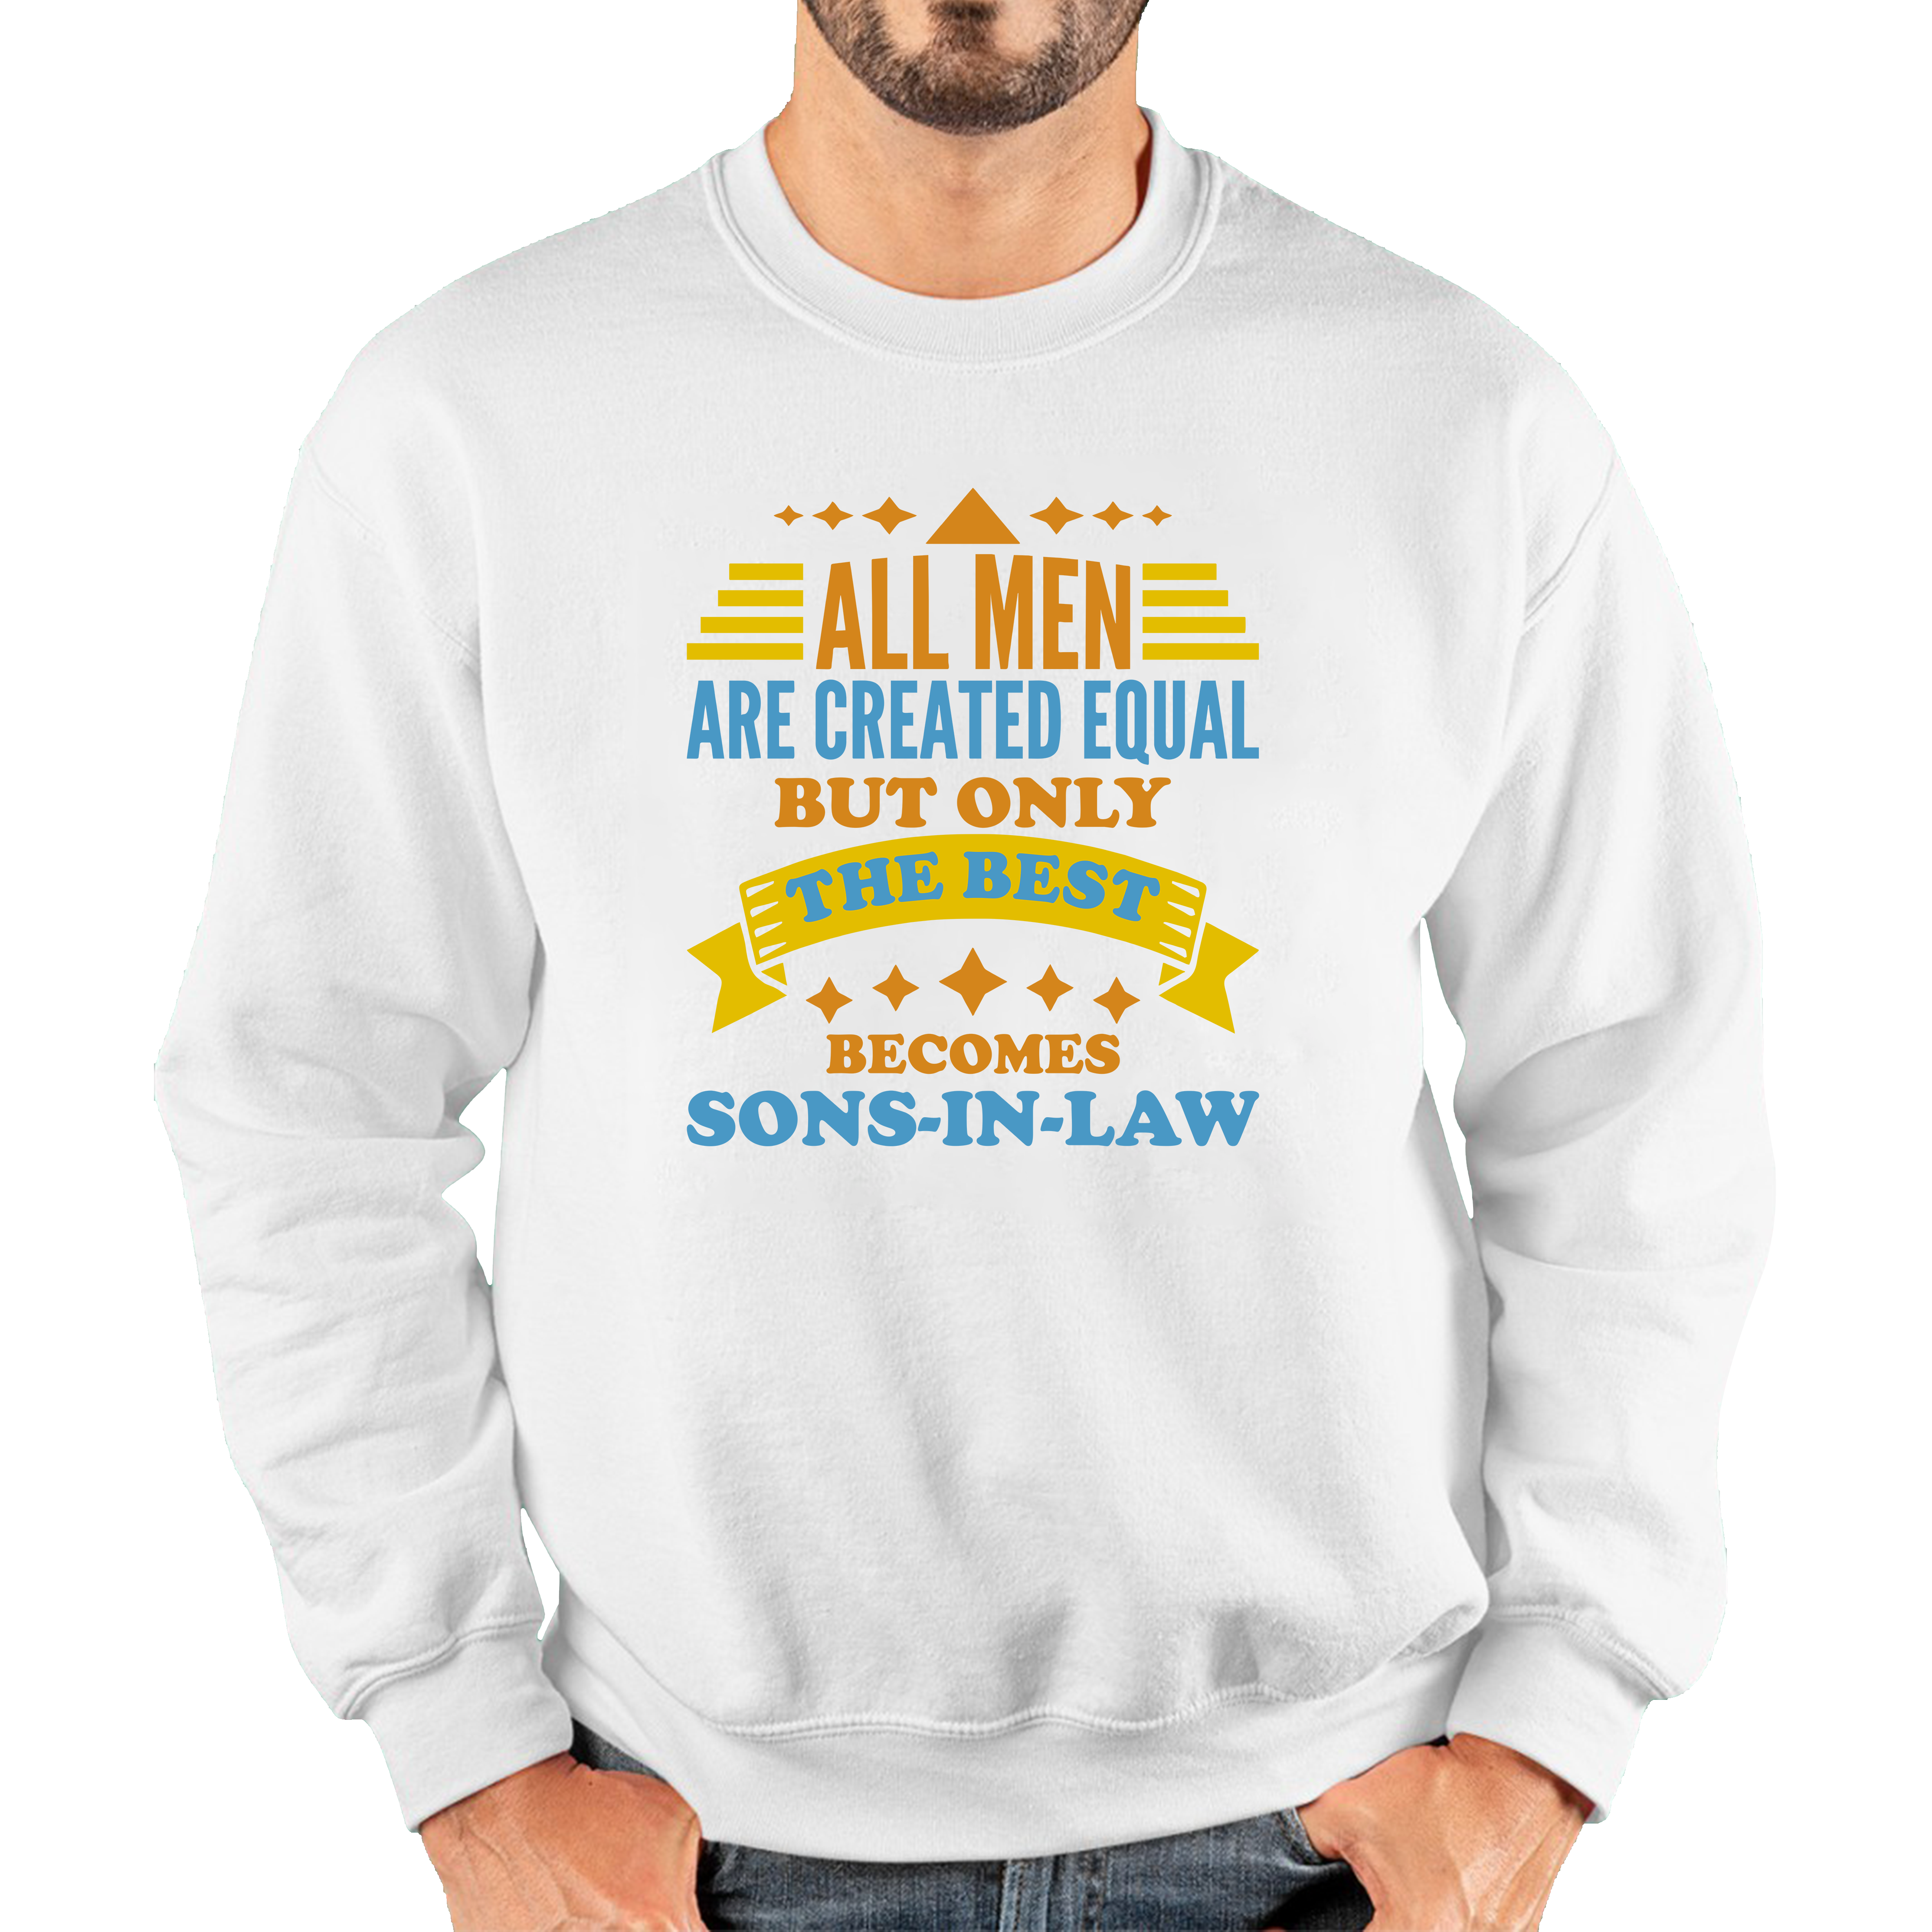 All Men Are Created Equal But Only The Best Becomes Sons-In-Law Unisex Sweatshirt